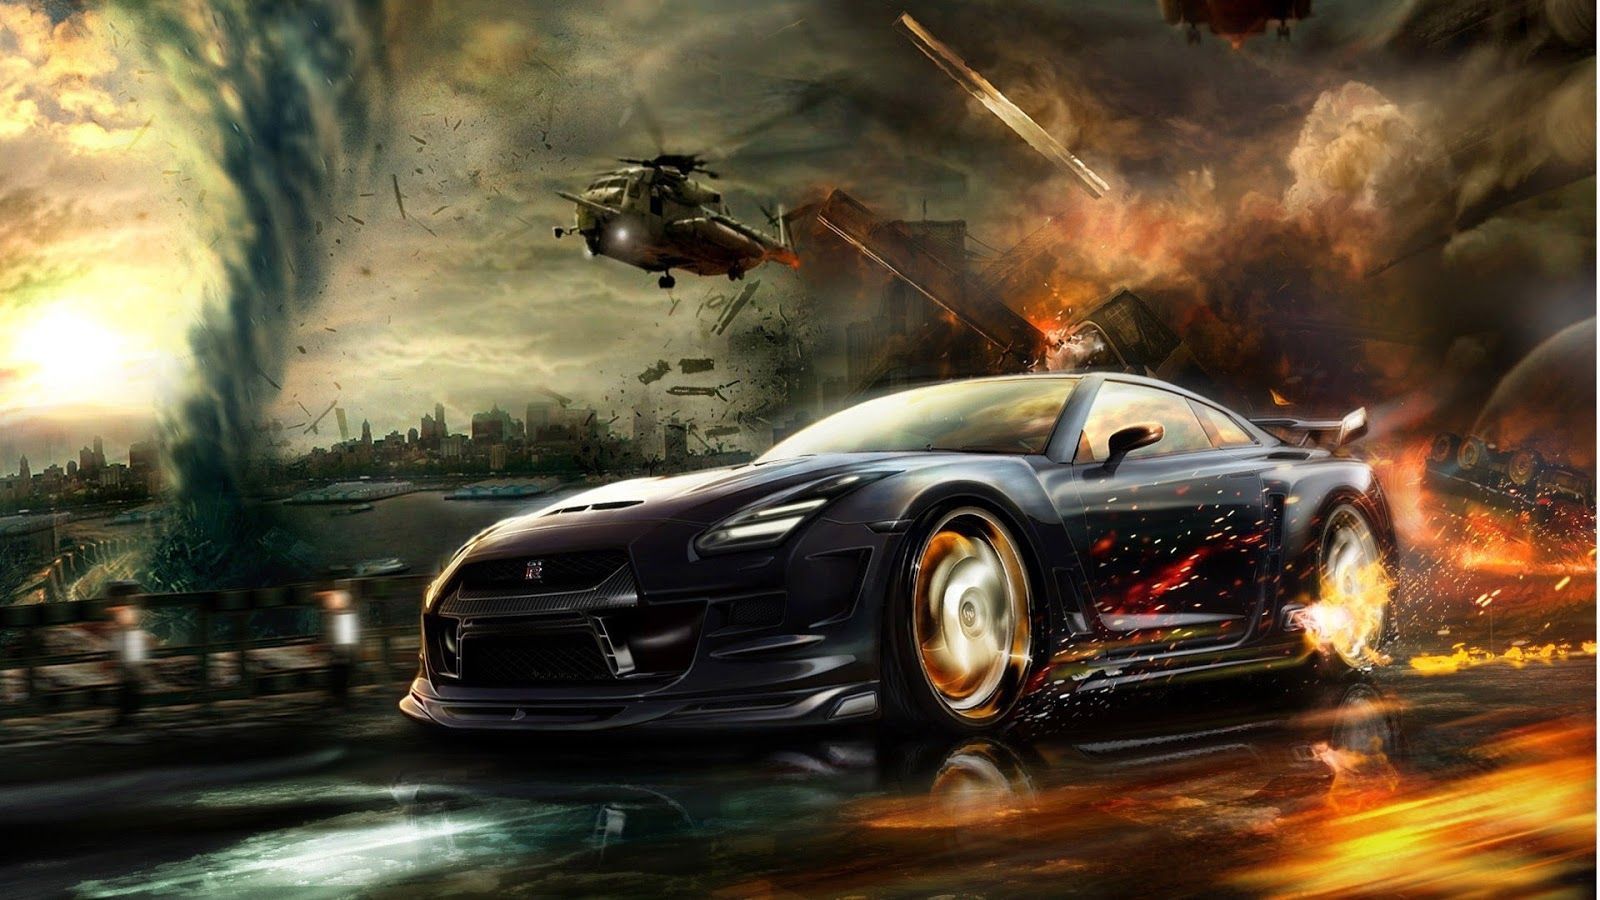 Cool Car Backgrounds Wallpapers